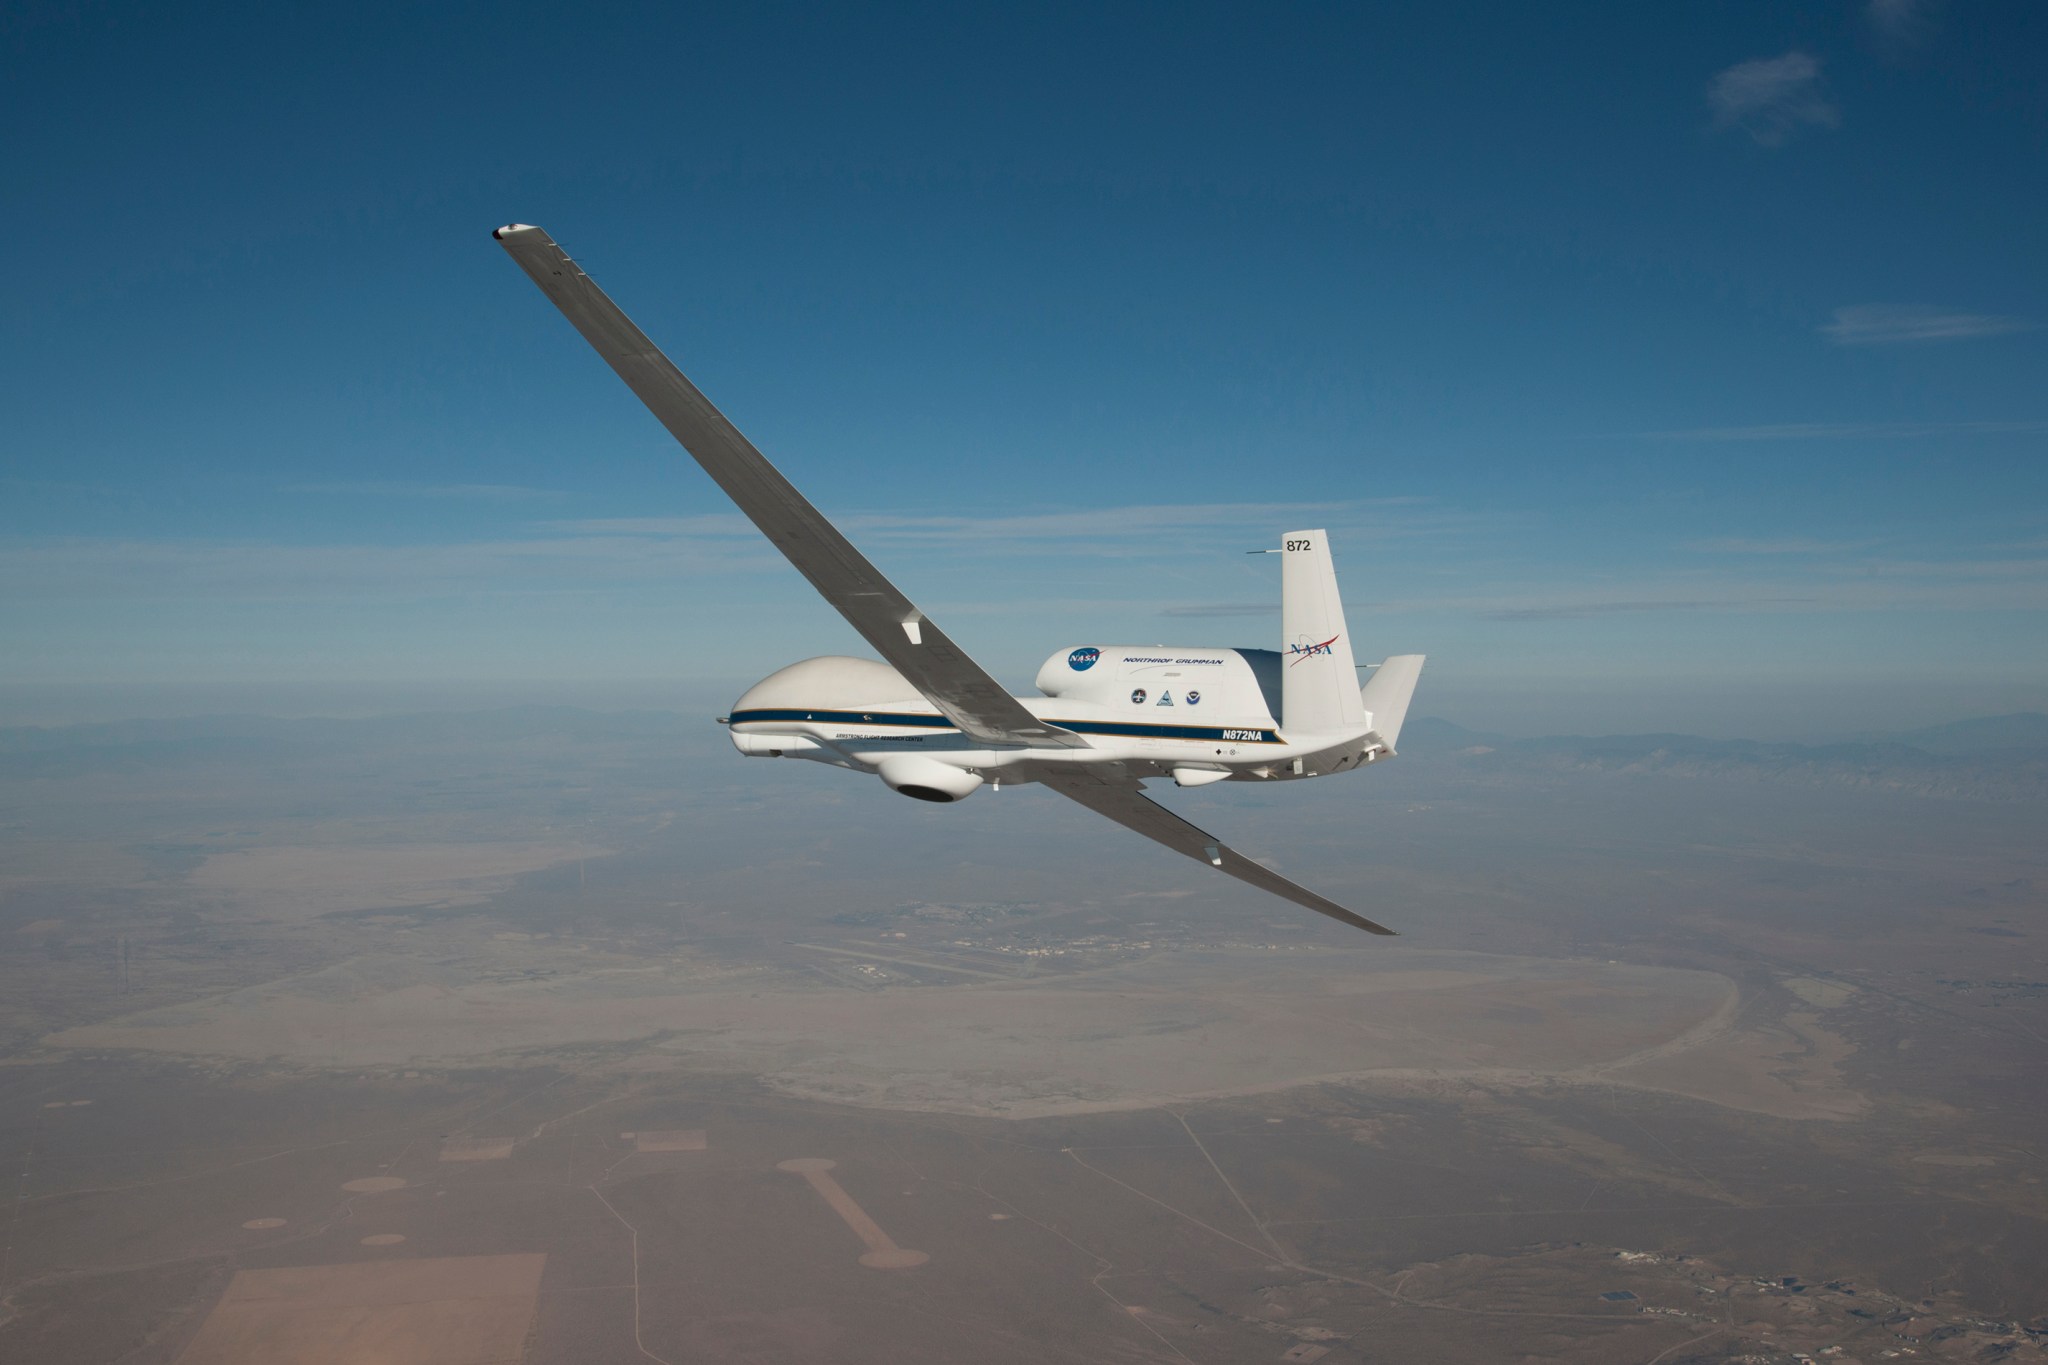 Aircraft with round nose and long, thin wings soars over Edwards Air Force Base.